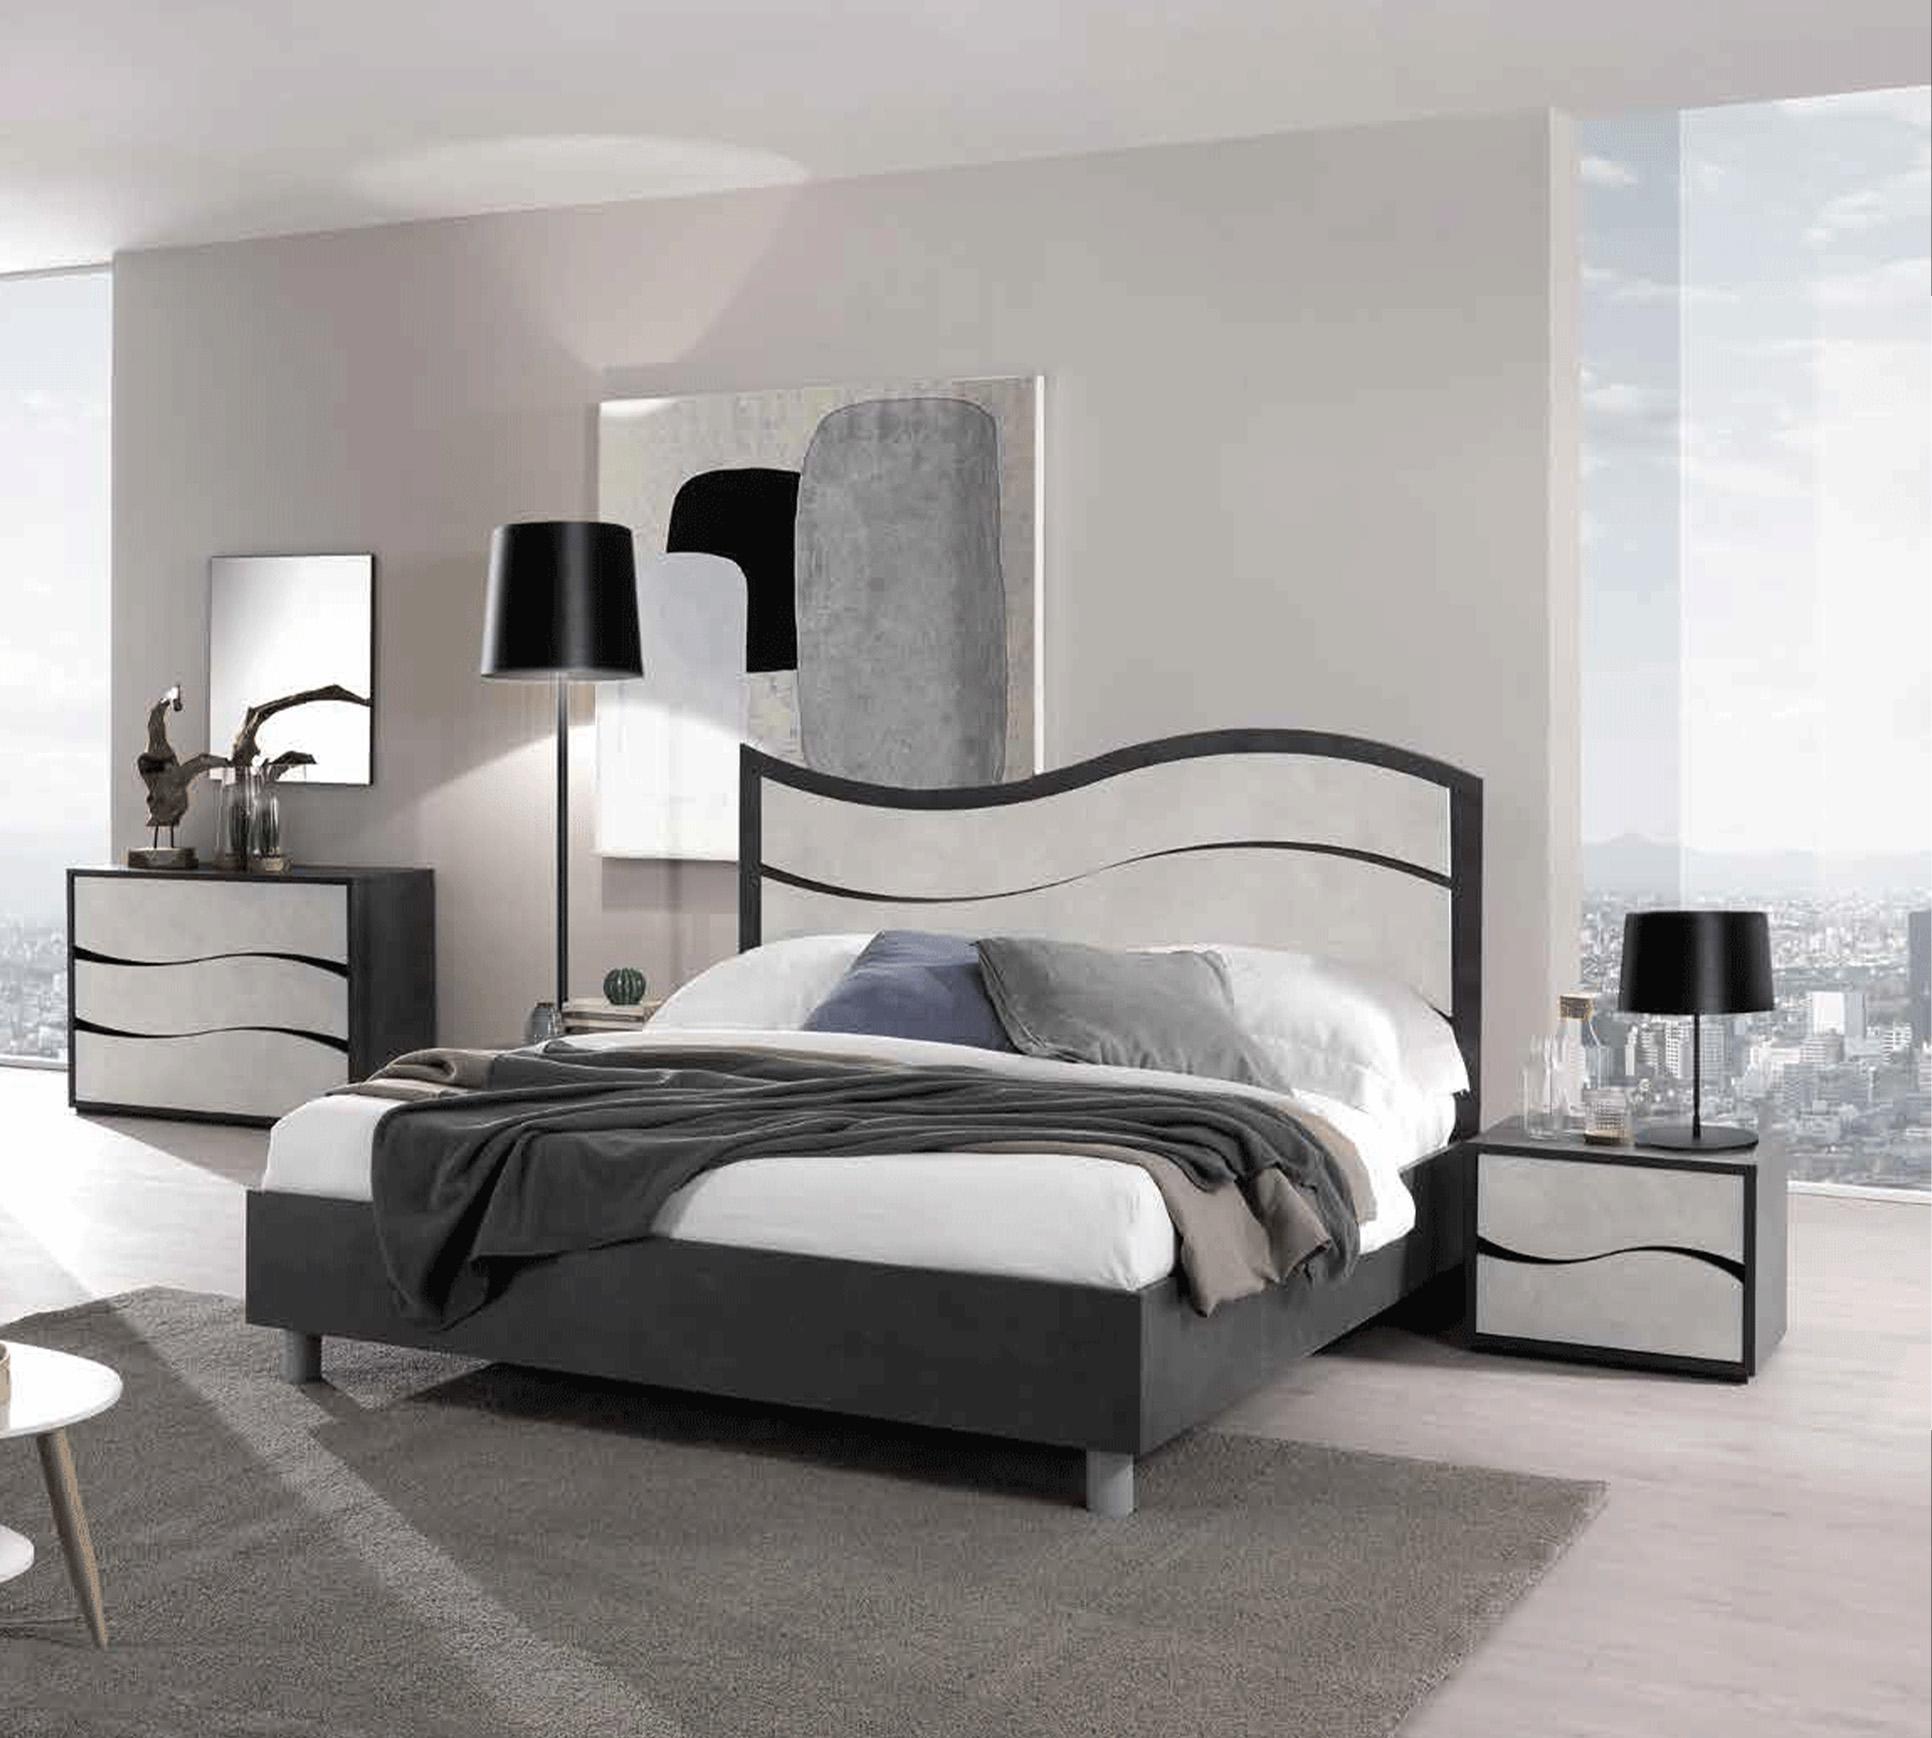 

    
Slate Grey & White King Bedroom Set 3 ISCHIA ESF Contemporary Made in ITALY
